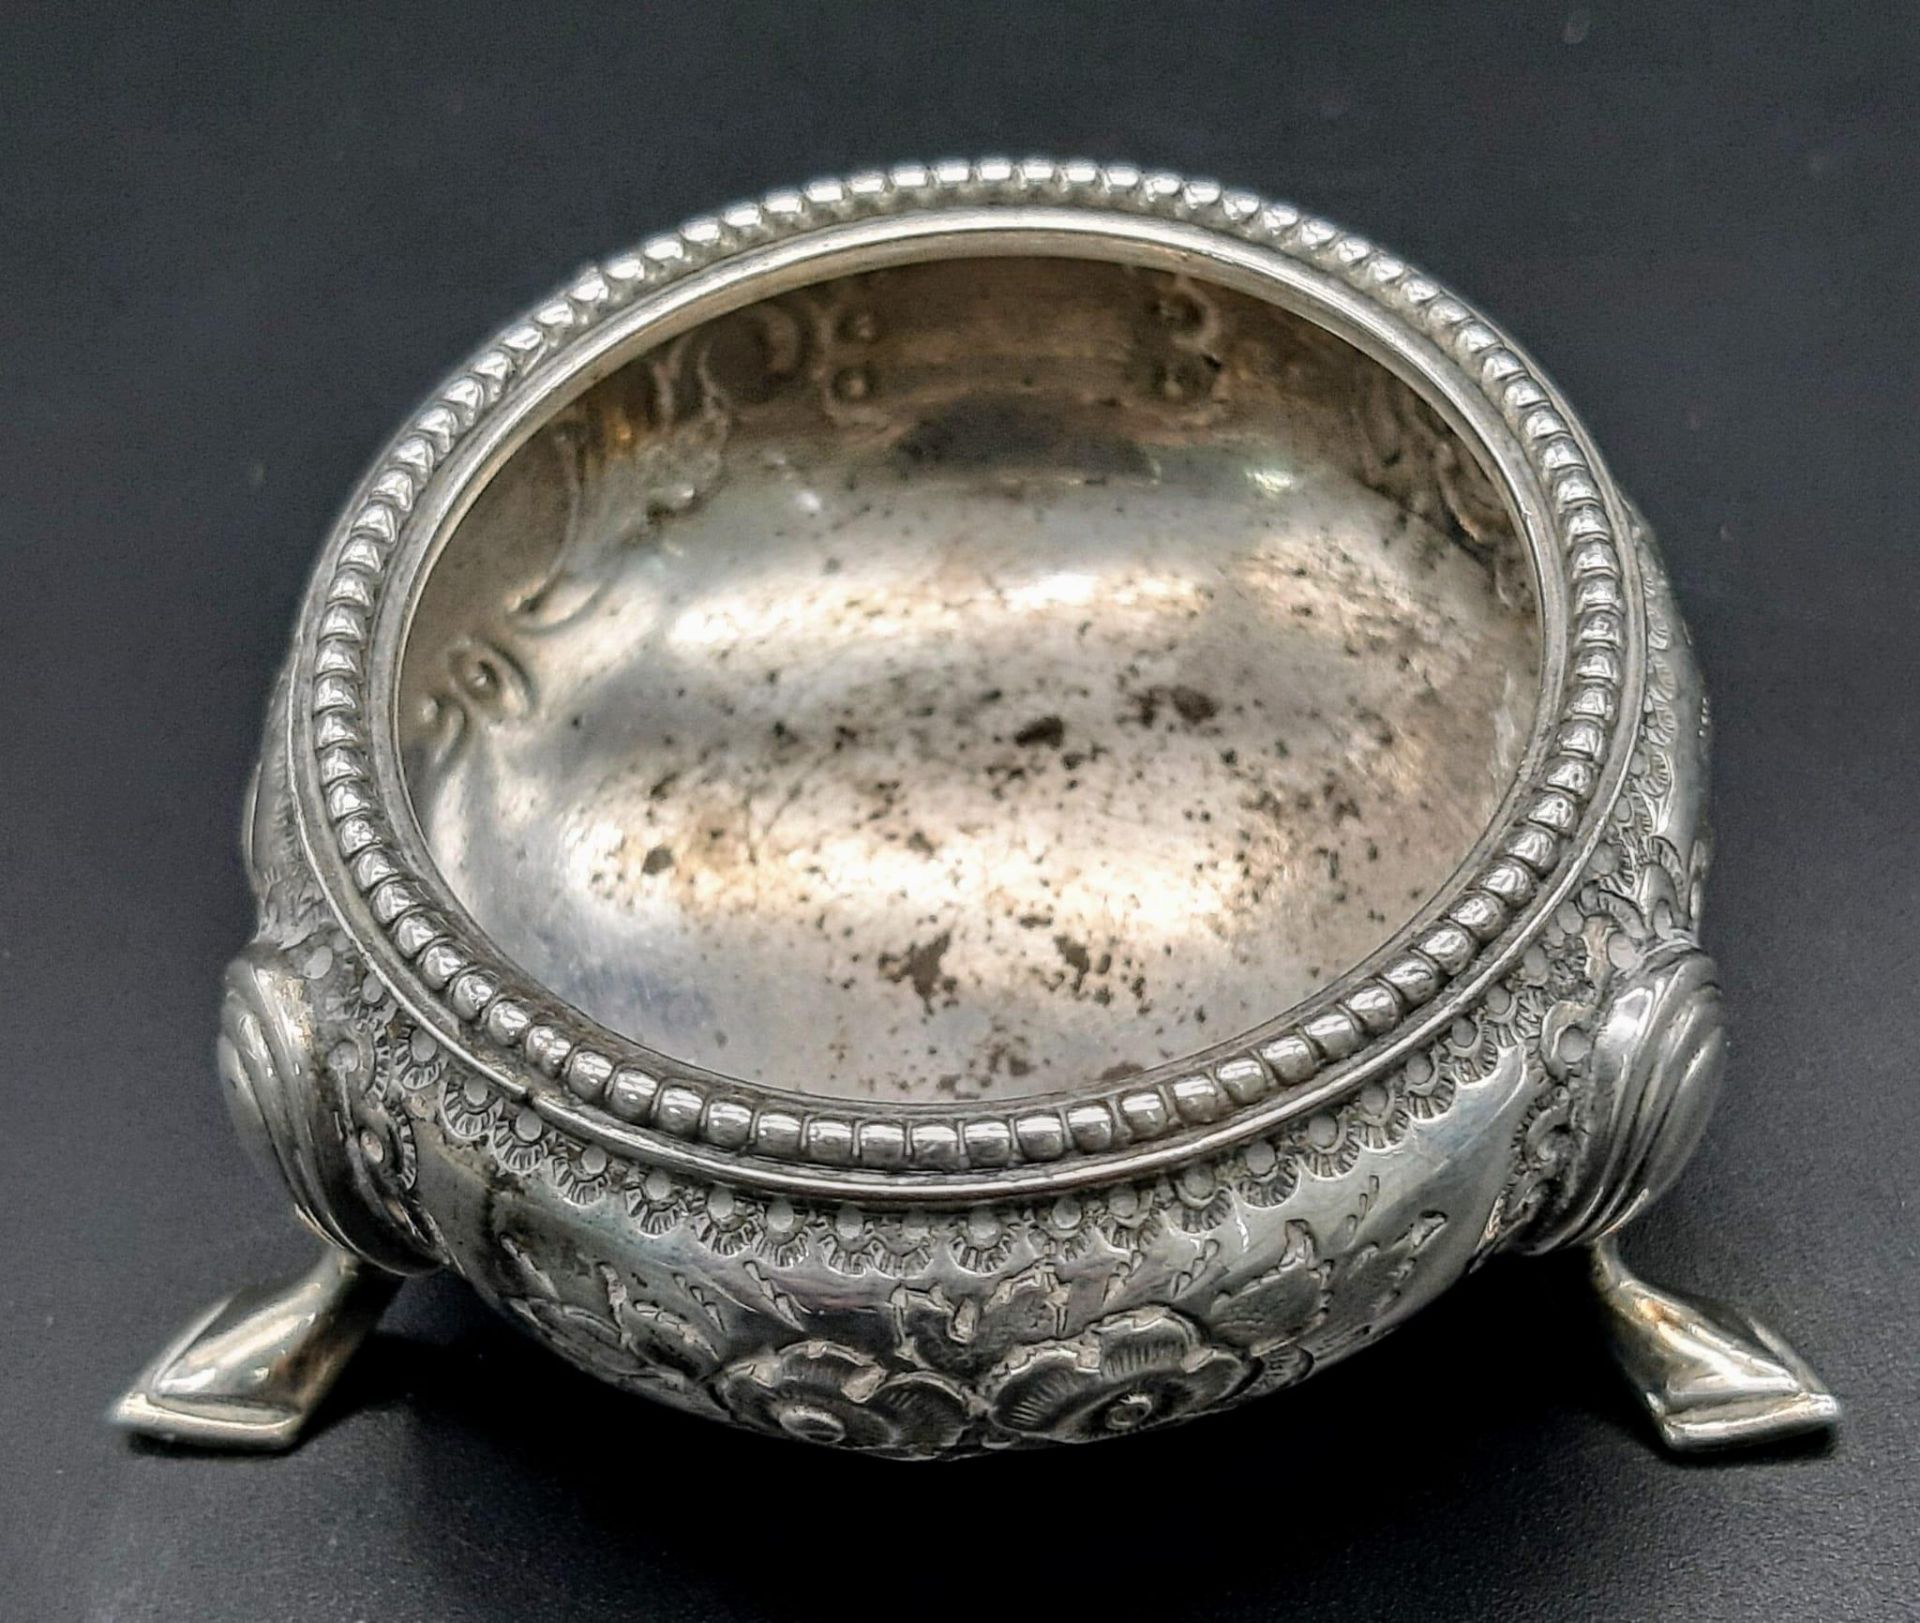 A set of Victorian antique sterling silver salt cellar with nicely floral ornate and silver spoon - Image 2 of 8